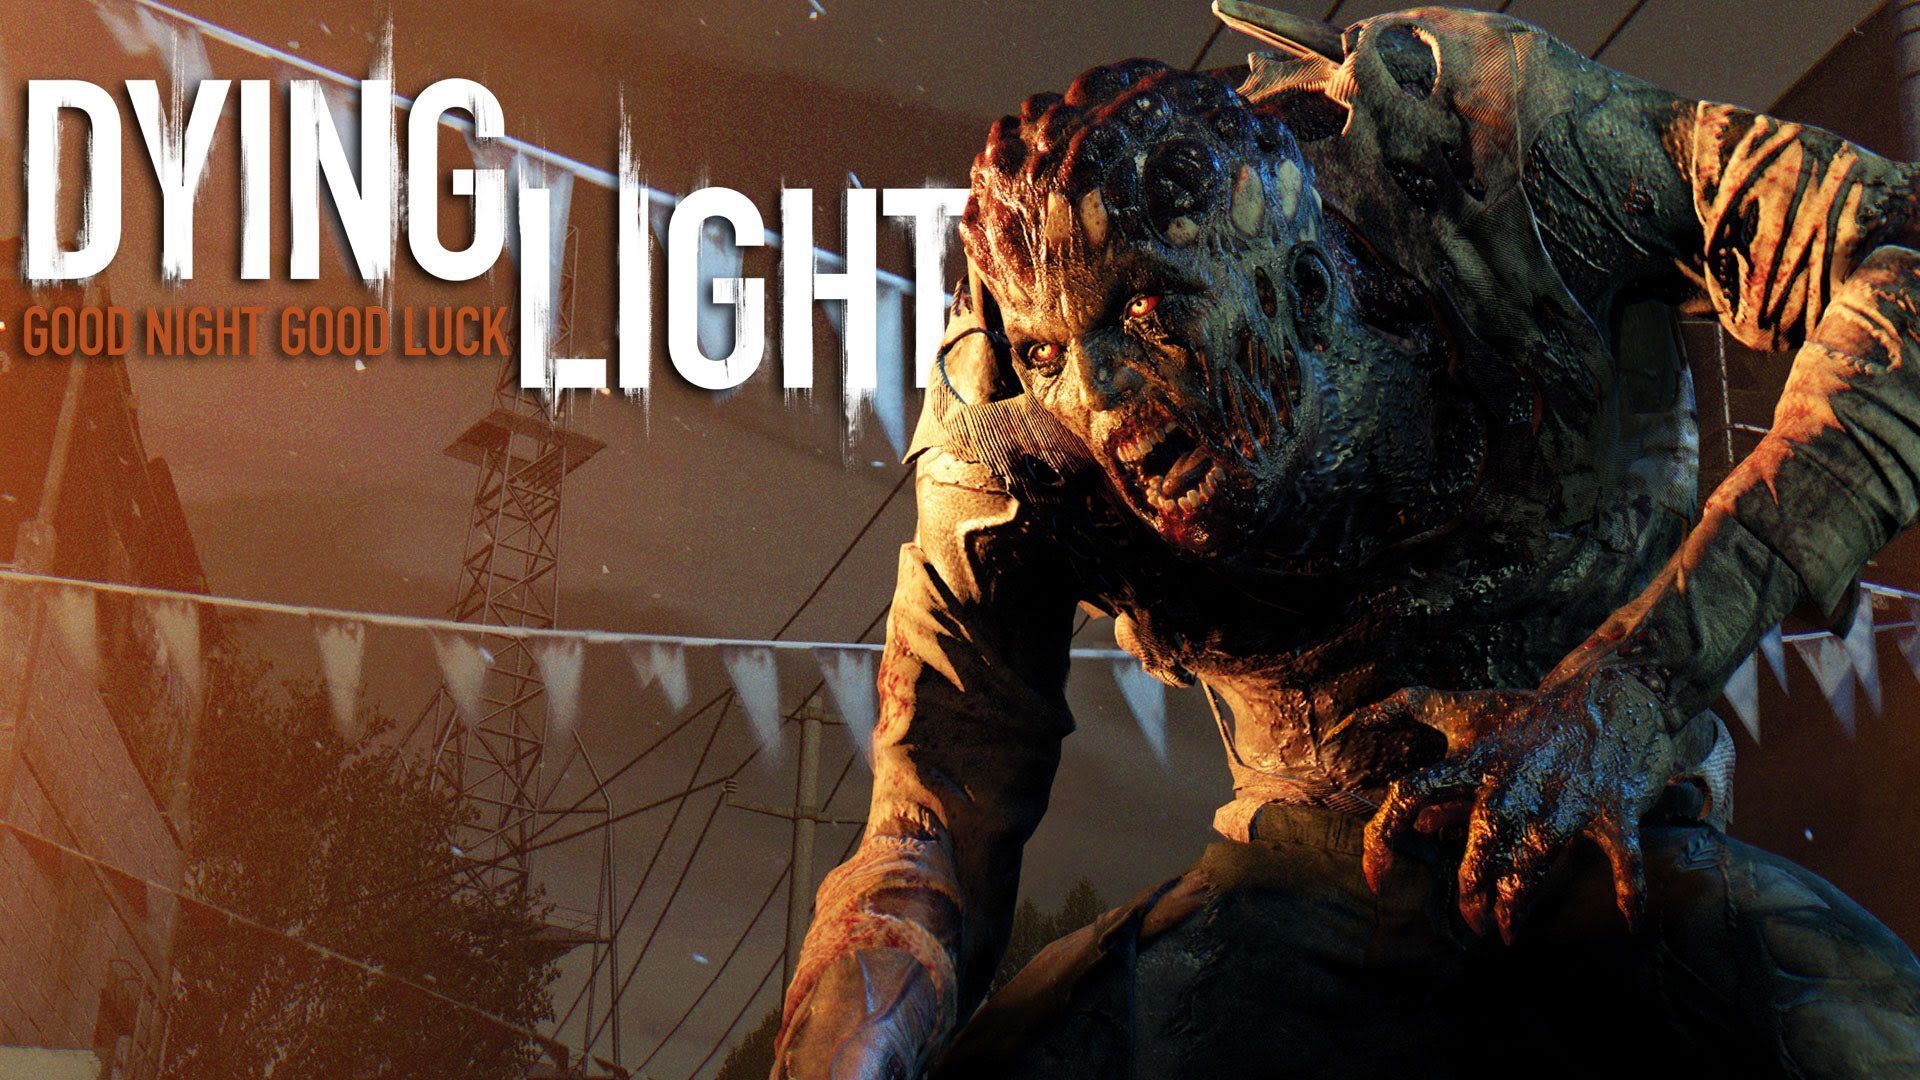 Preview for Dying Light on Twitch